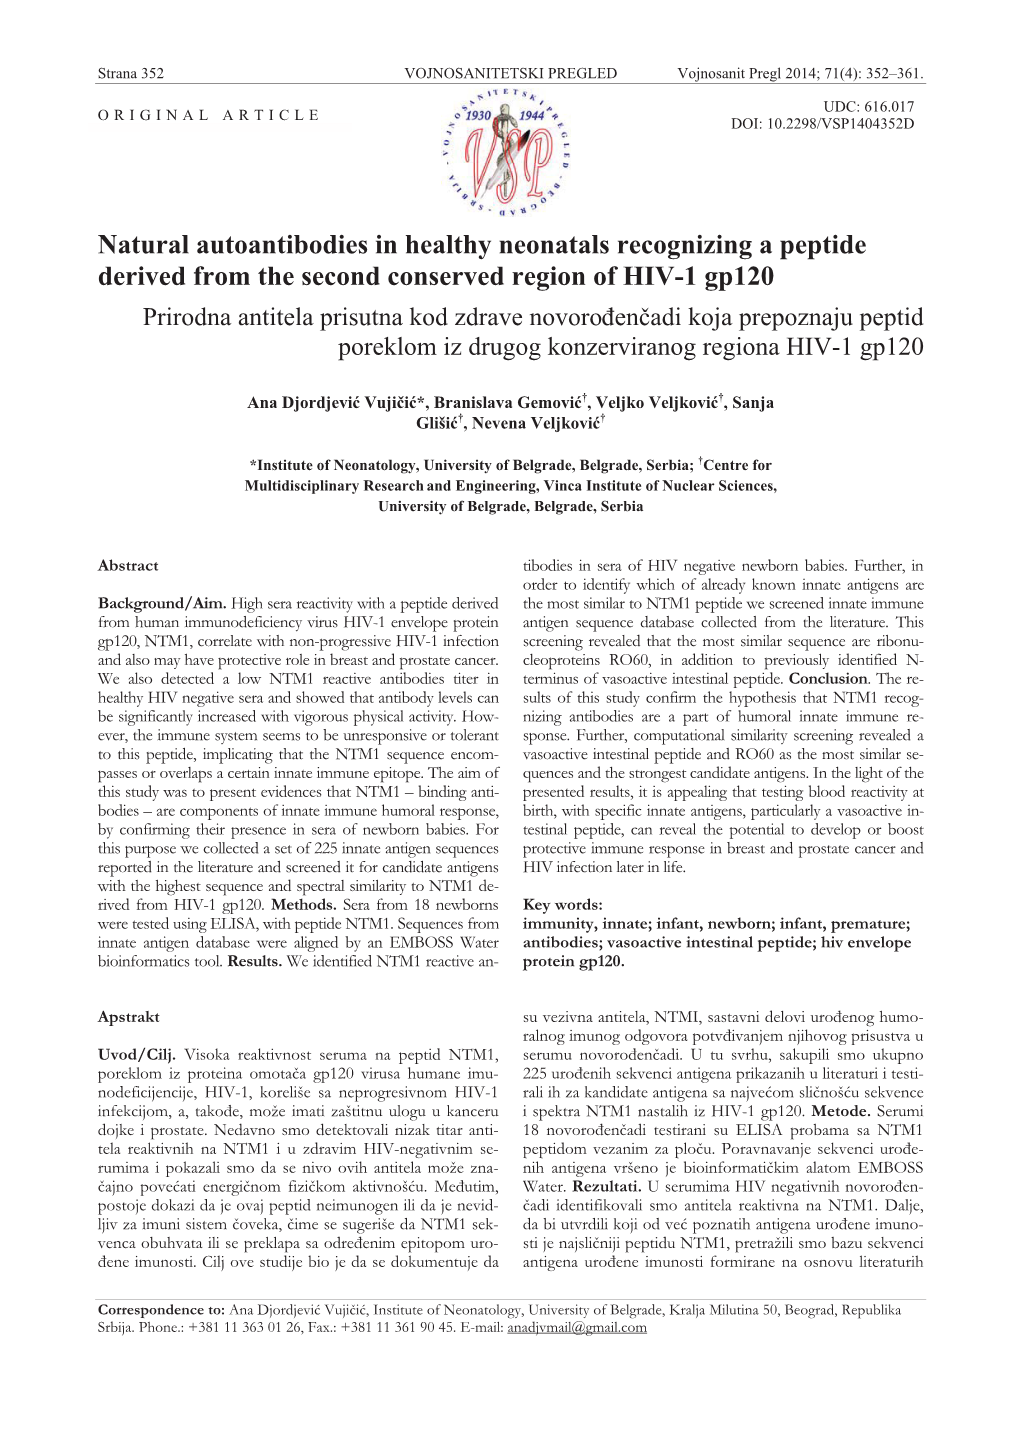 Natural Autoantibodies in Healthy Neonatals Recognizing a Peptide